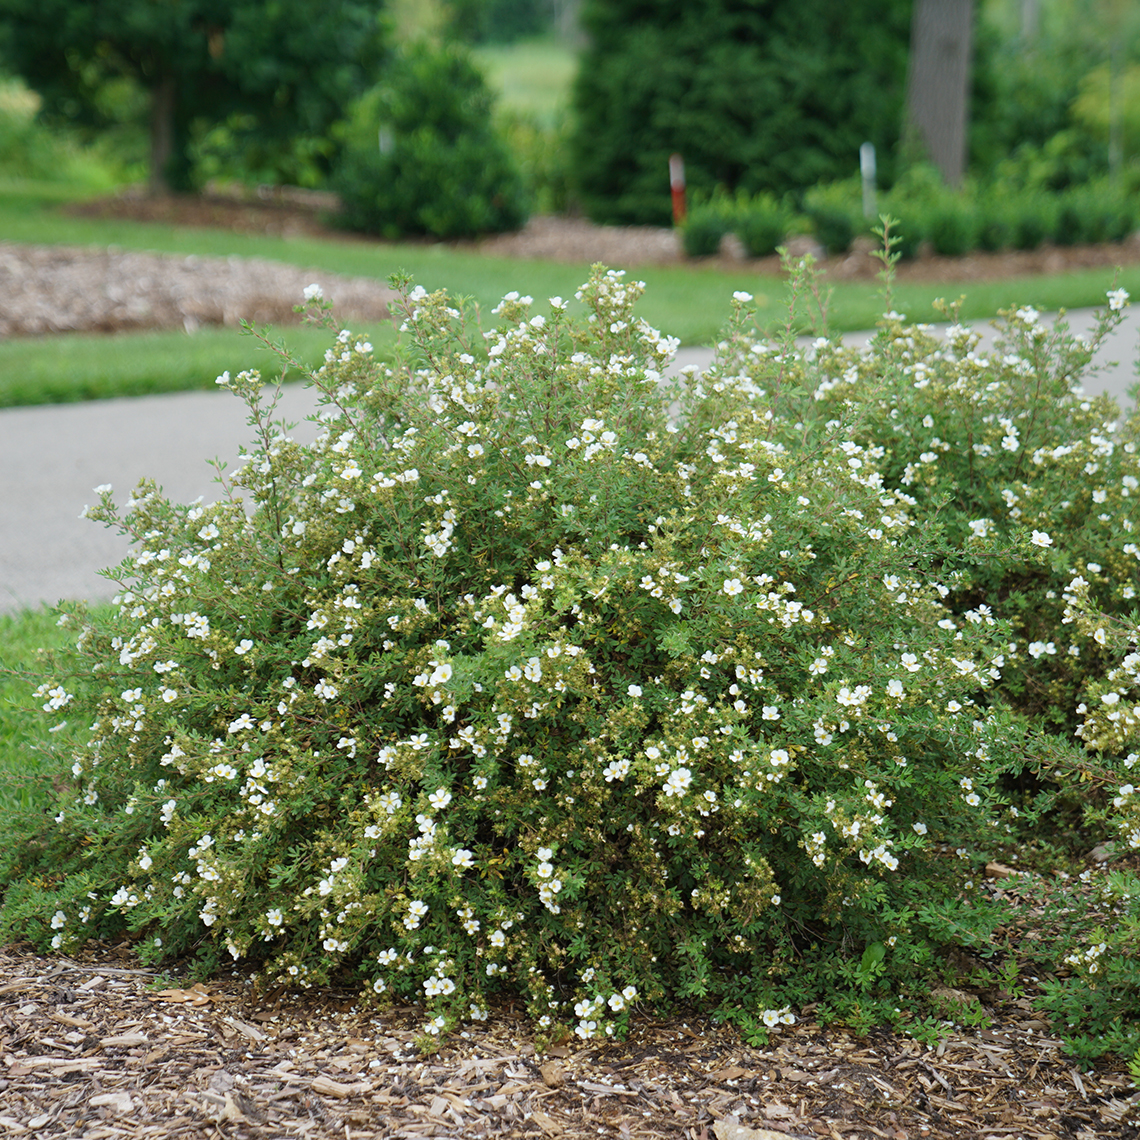 Mounded Happy Face White Potentilla planted along paved walkway